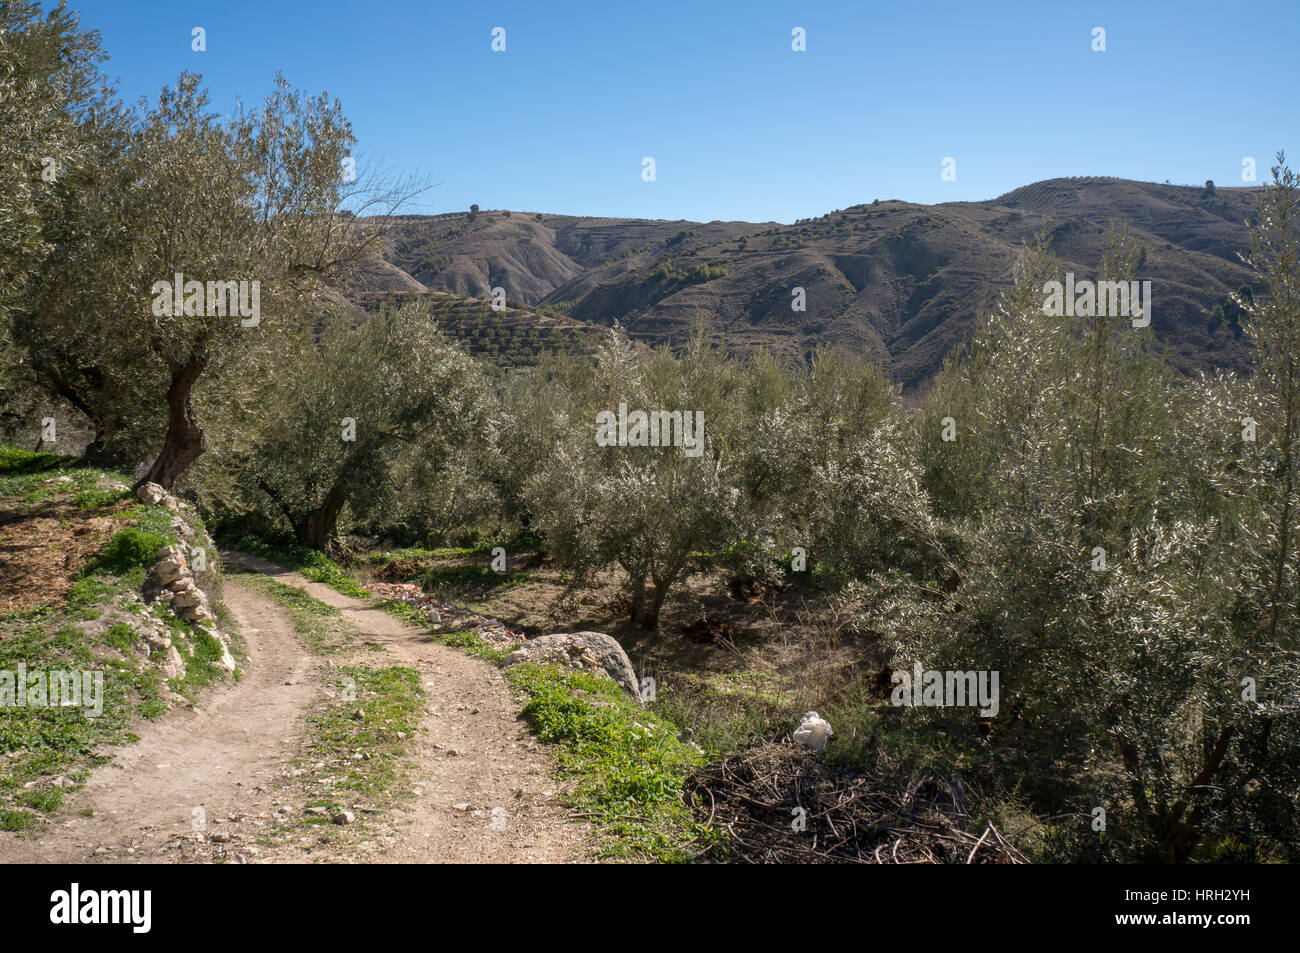 Small path leading through olive trees with a mountain in the background Stock Photo